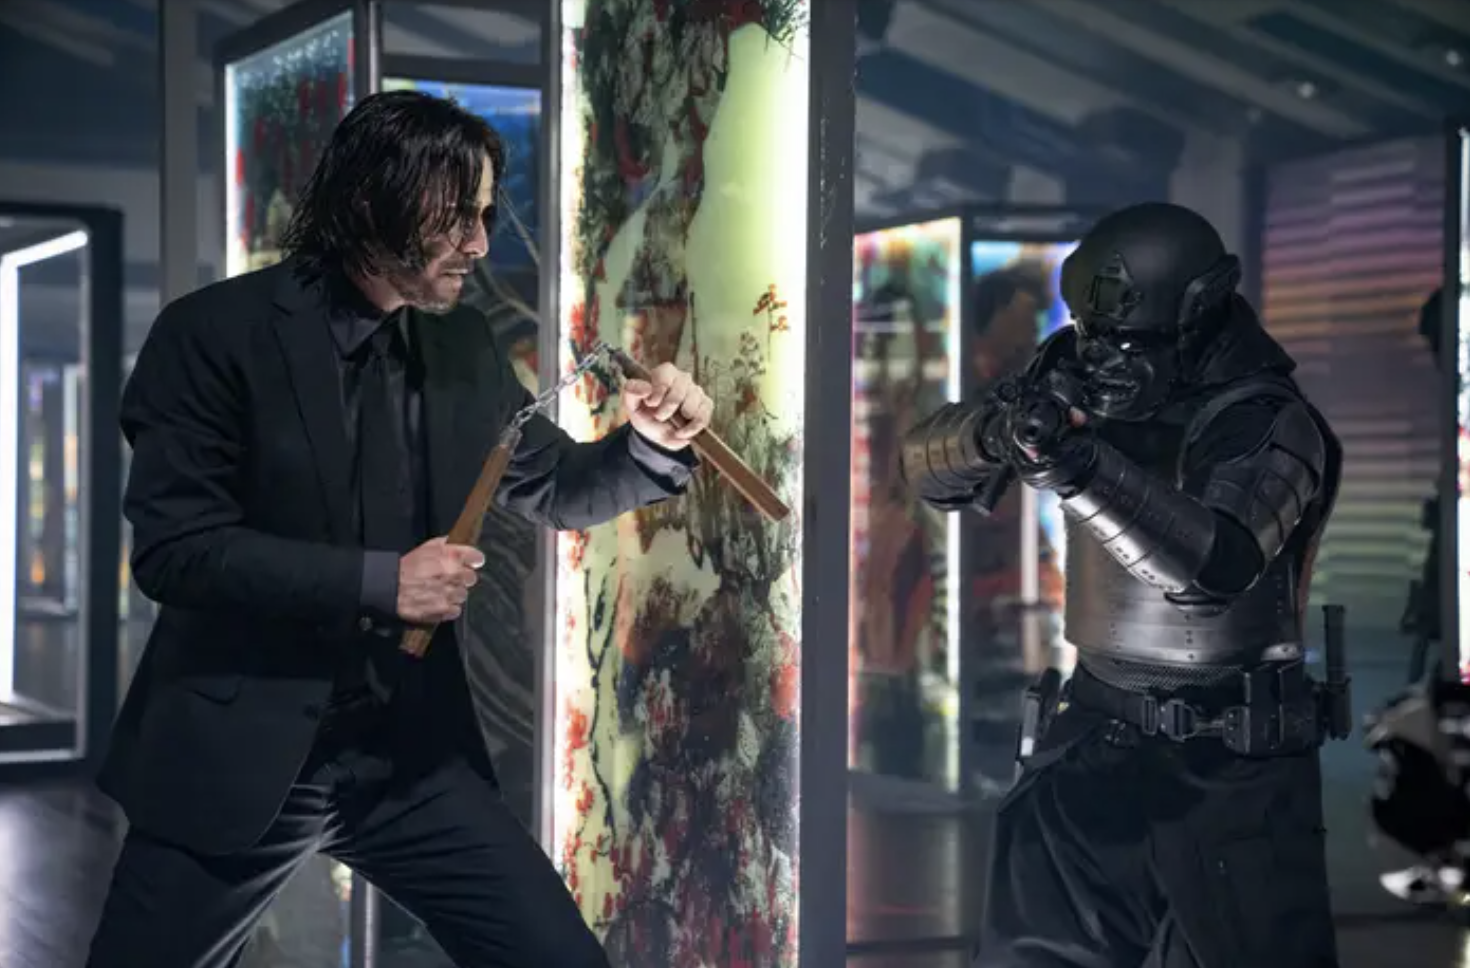 John Wick holds nunchucks and faces a masked armed man in all black